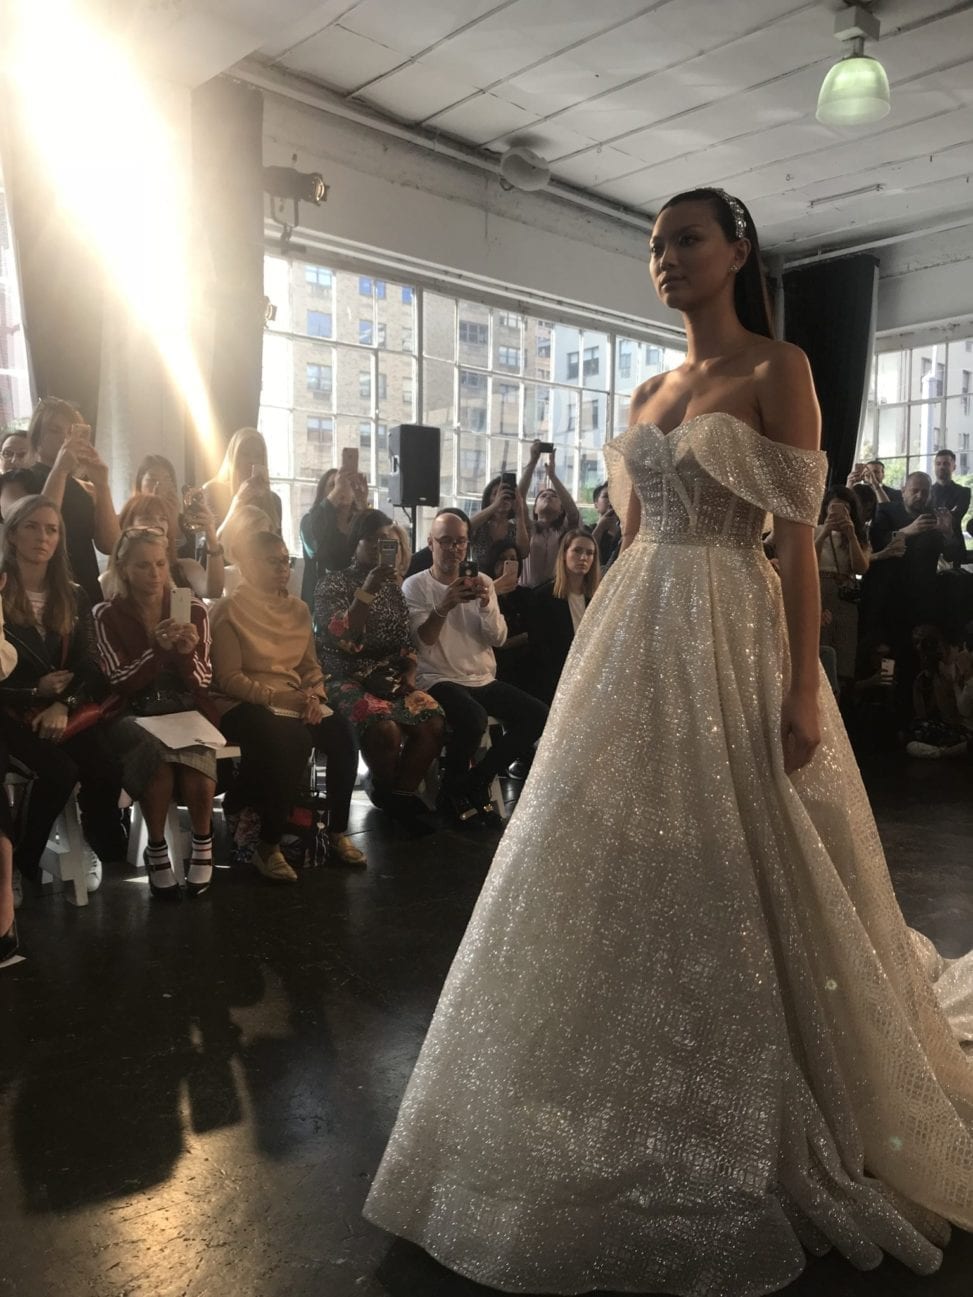 An ethnically Asian model walks the runway in a sparking off the shoulder white wedding dress in Berta 2019 fall/winter show at New York Bridal Fashion Week